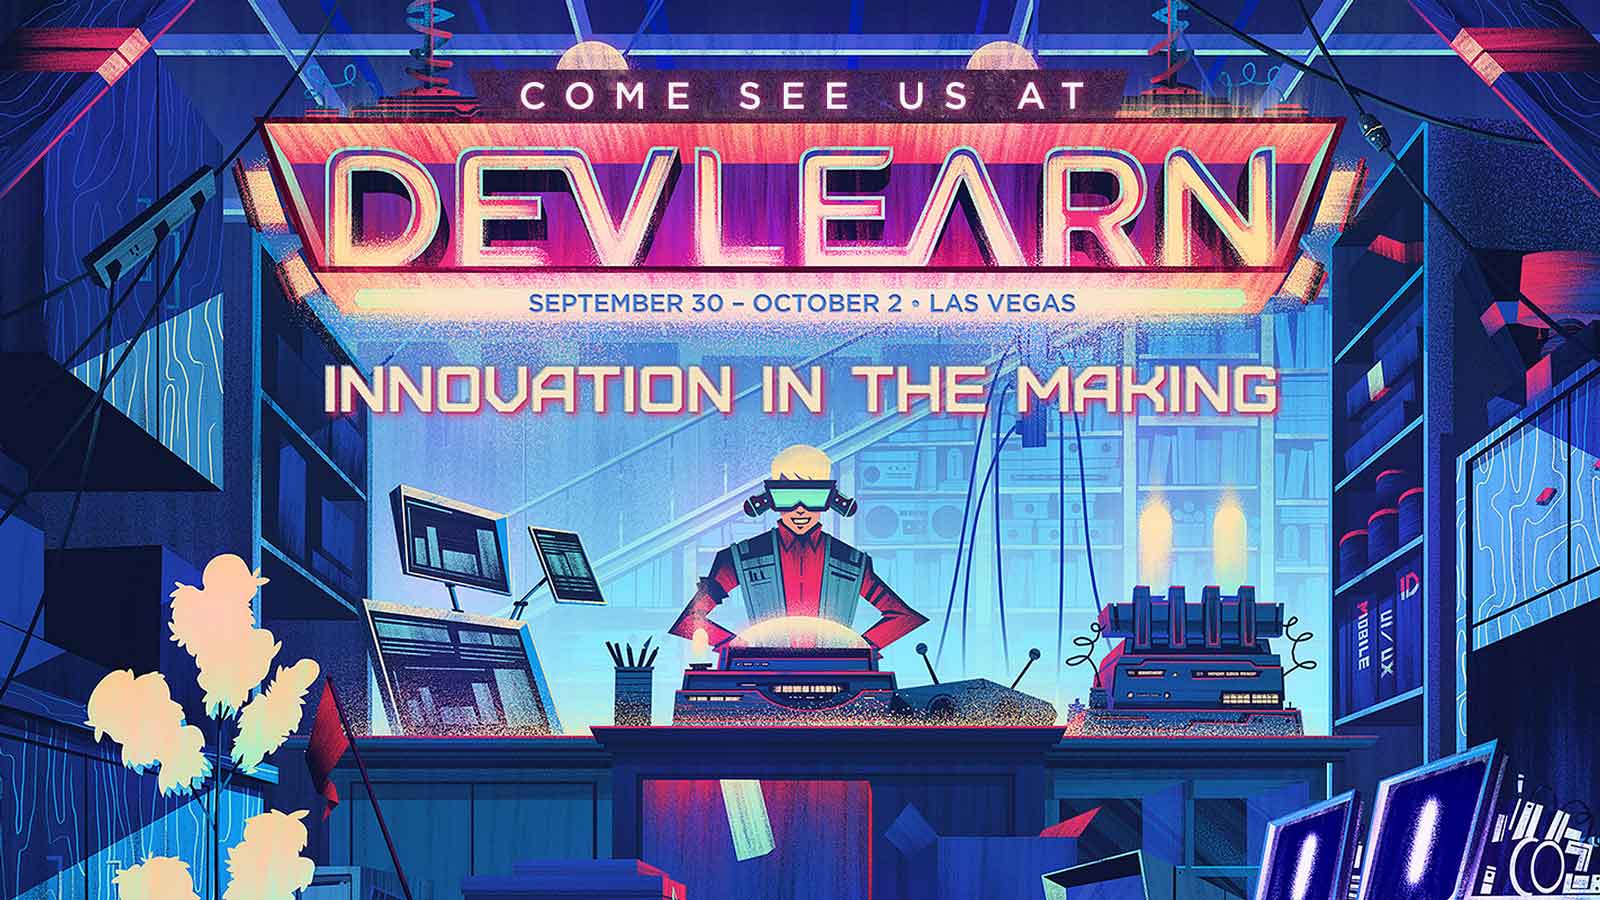 eXact learning solutions on stage at DevLearn 2015